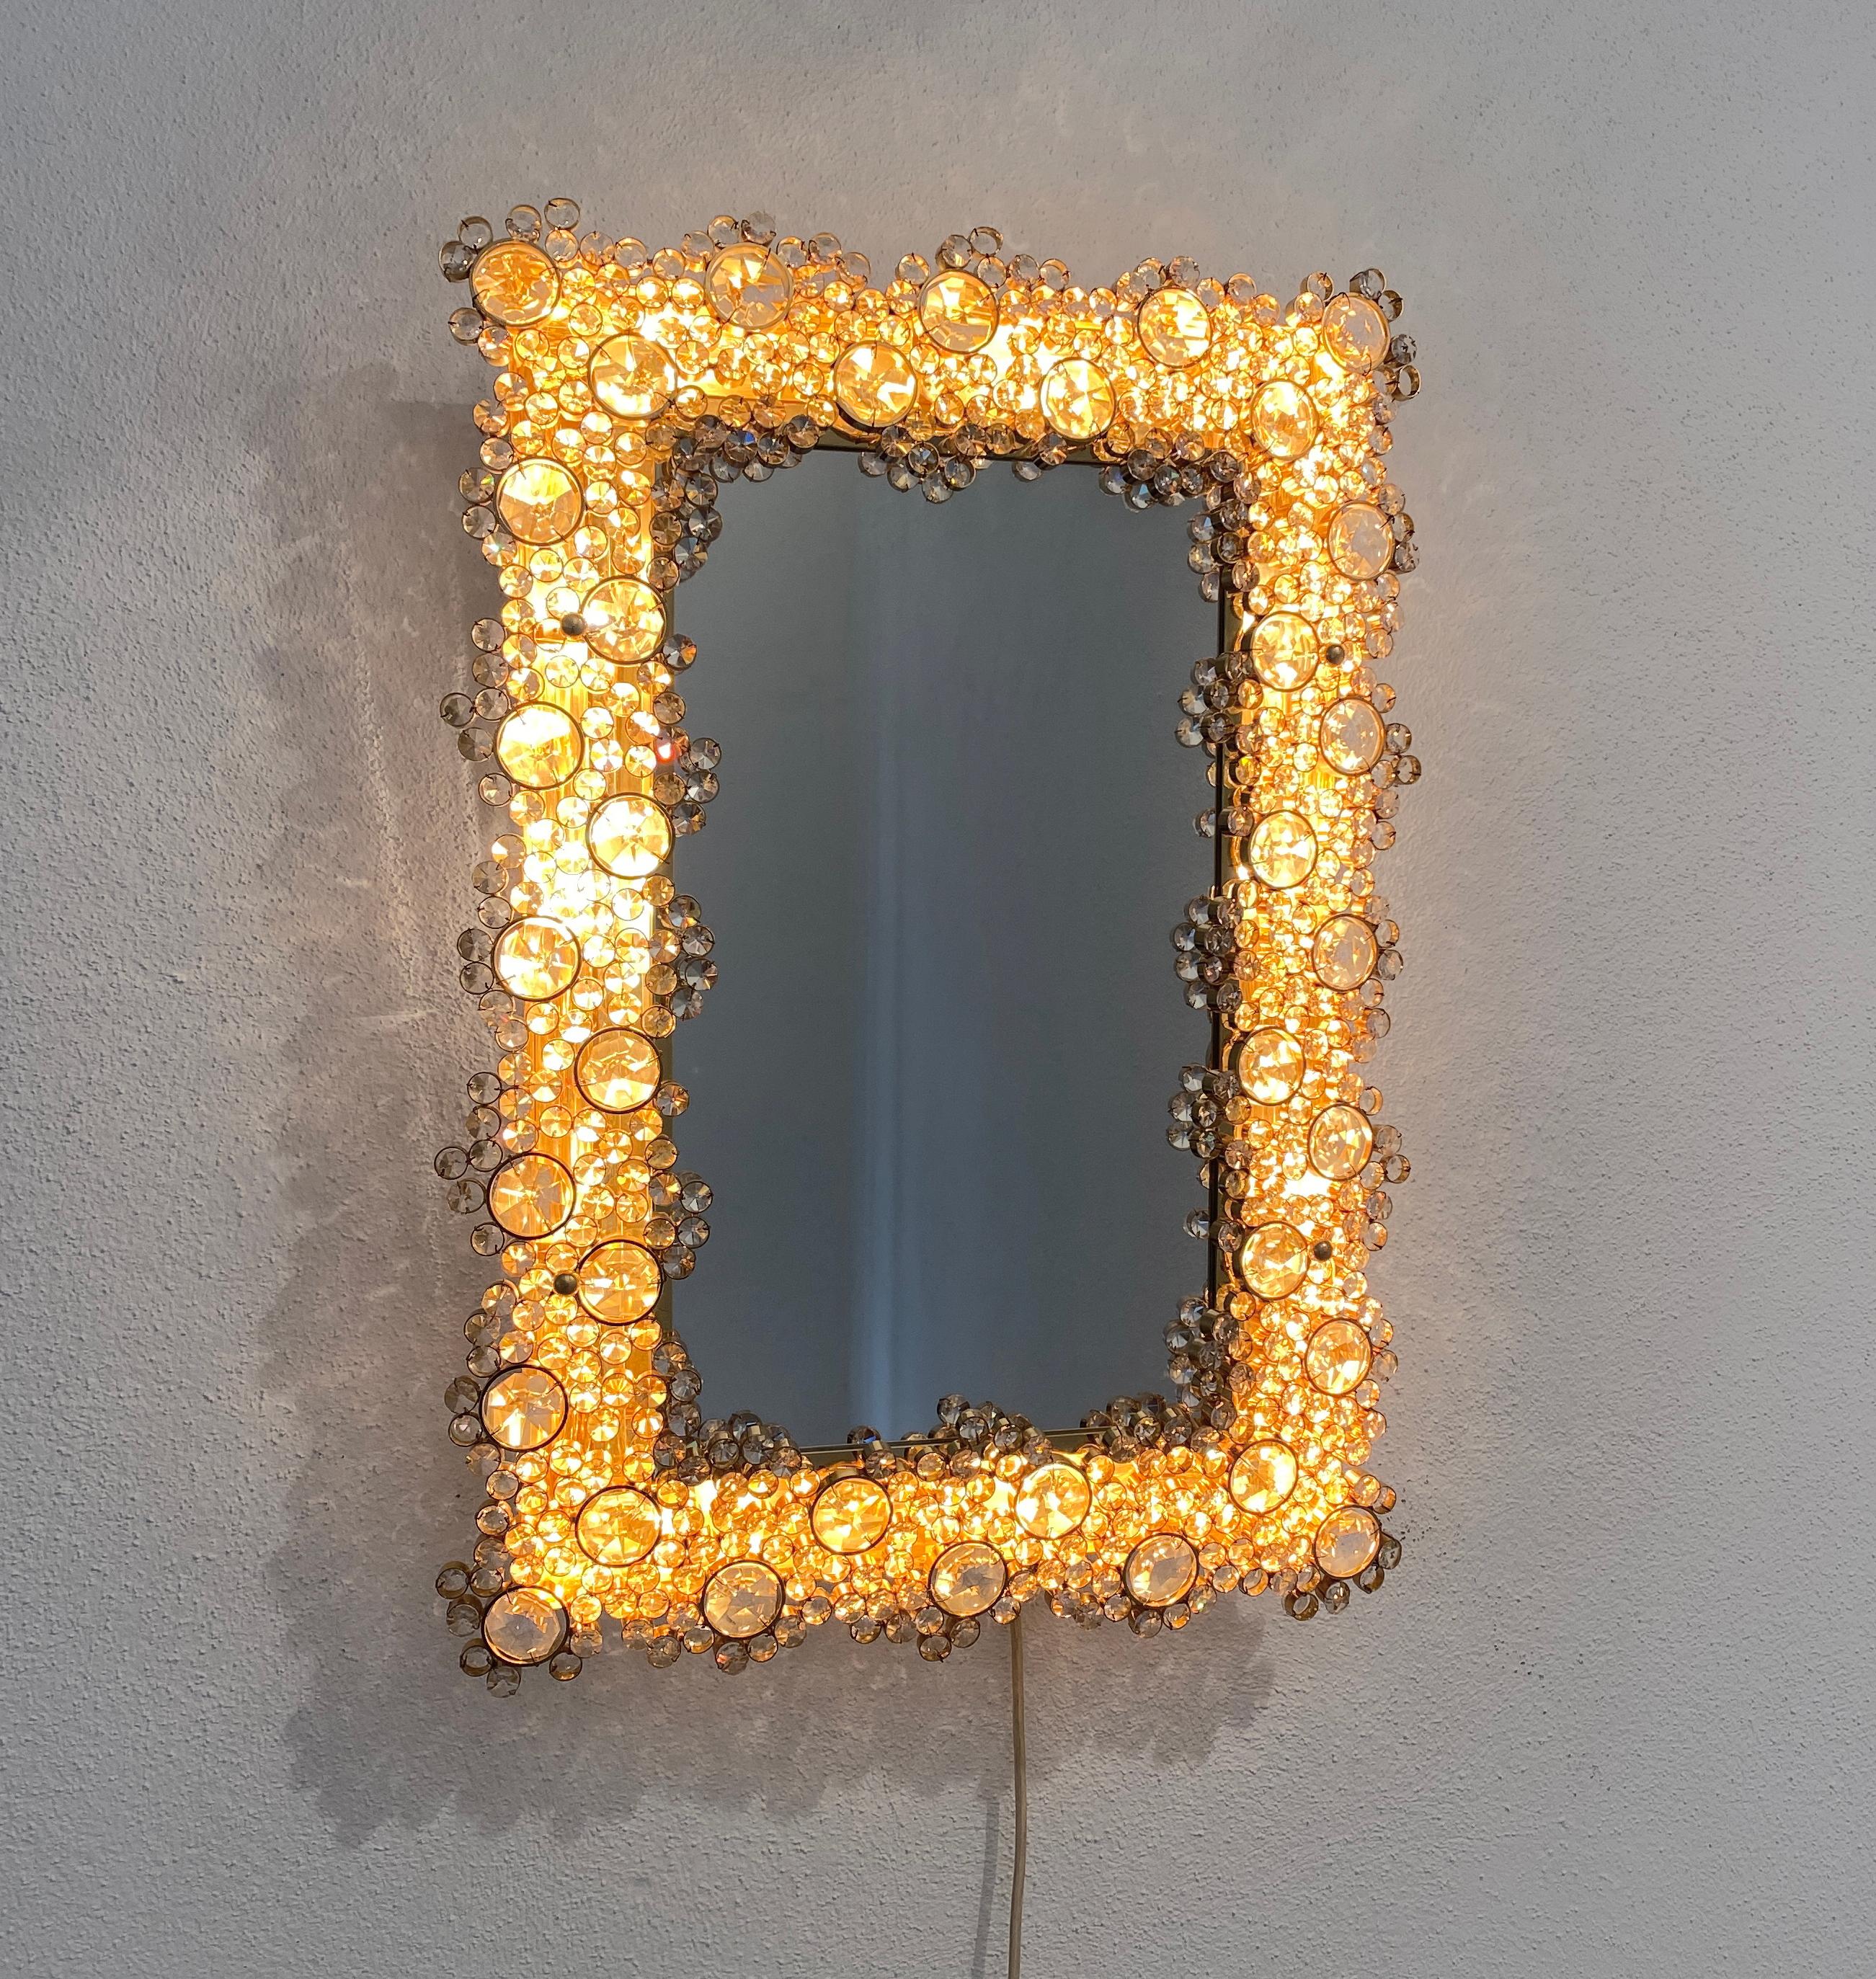 Rectangular mid century golden encrusted glass mirror by Palwa Germany, 1960

Dimensions are 18.9